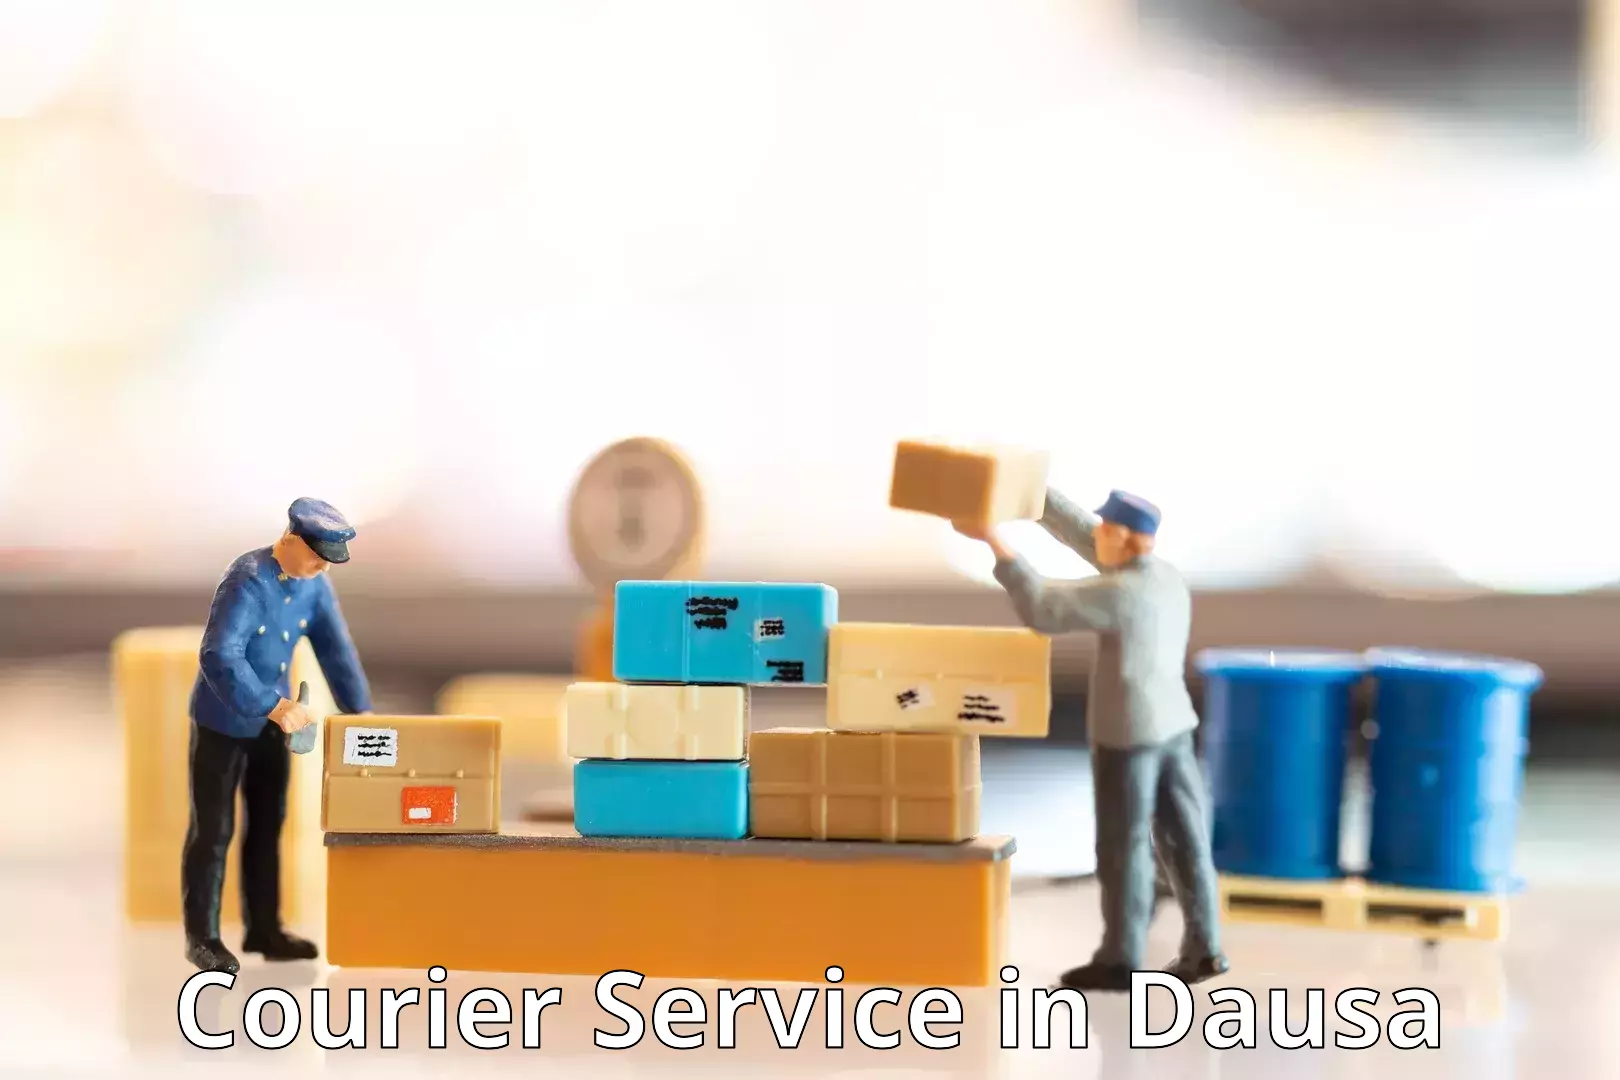 Efficient shipping operations in Dausa